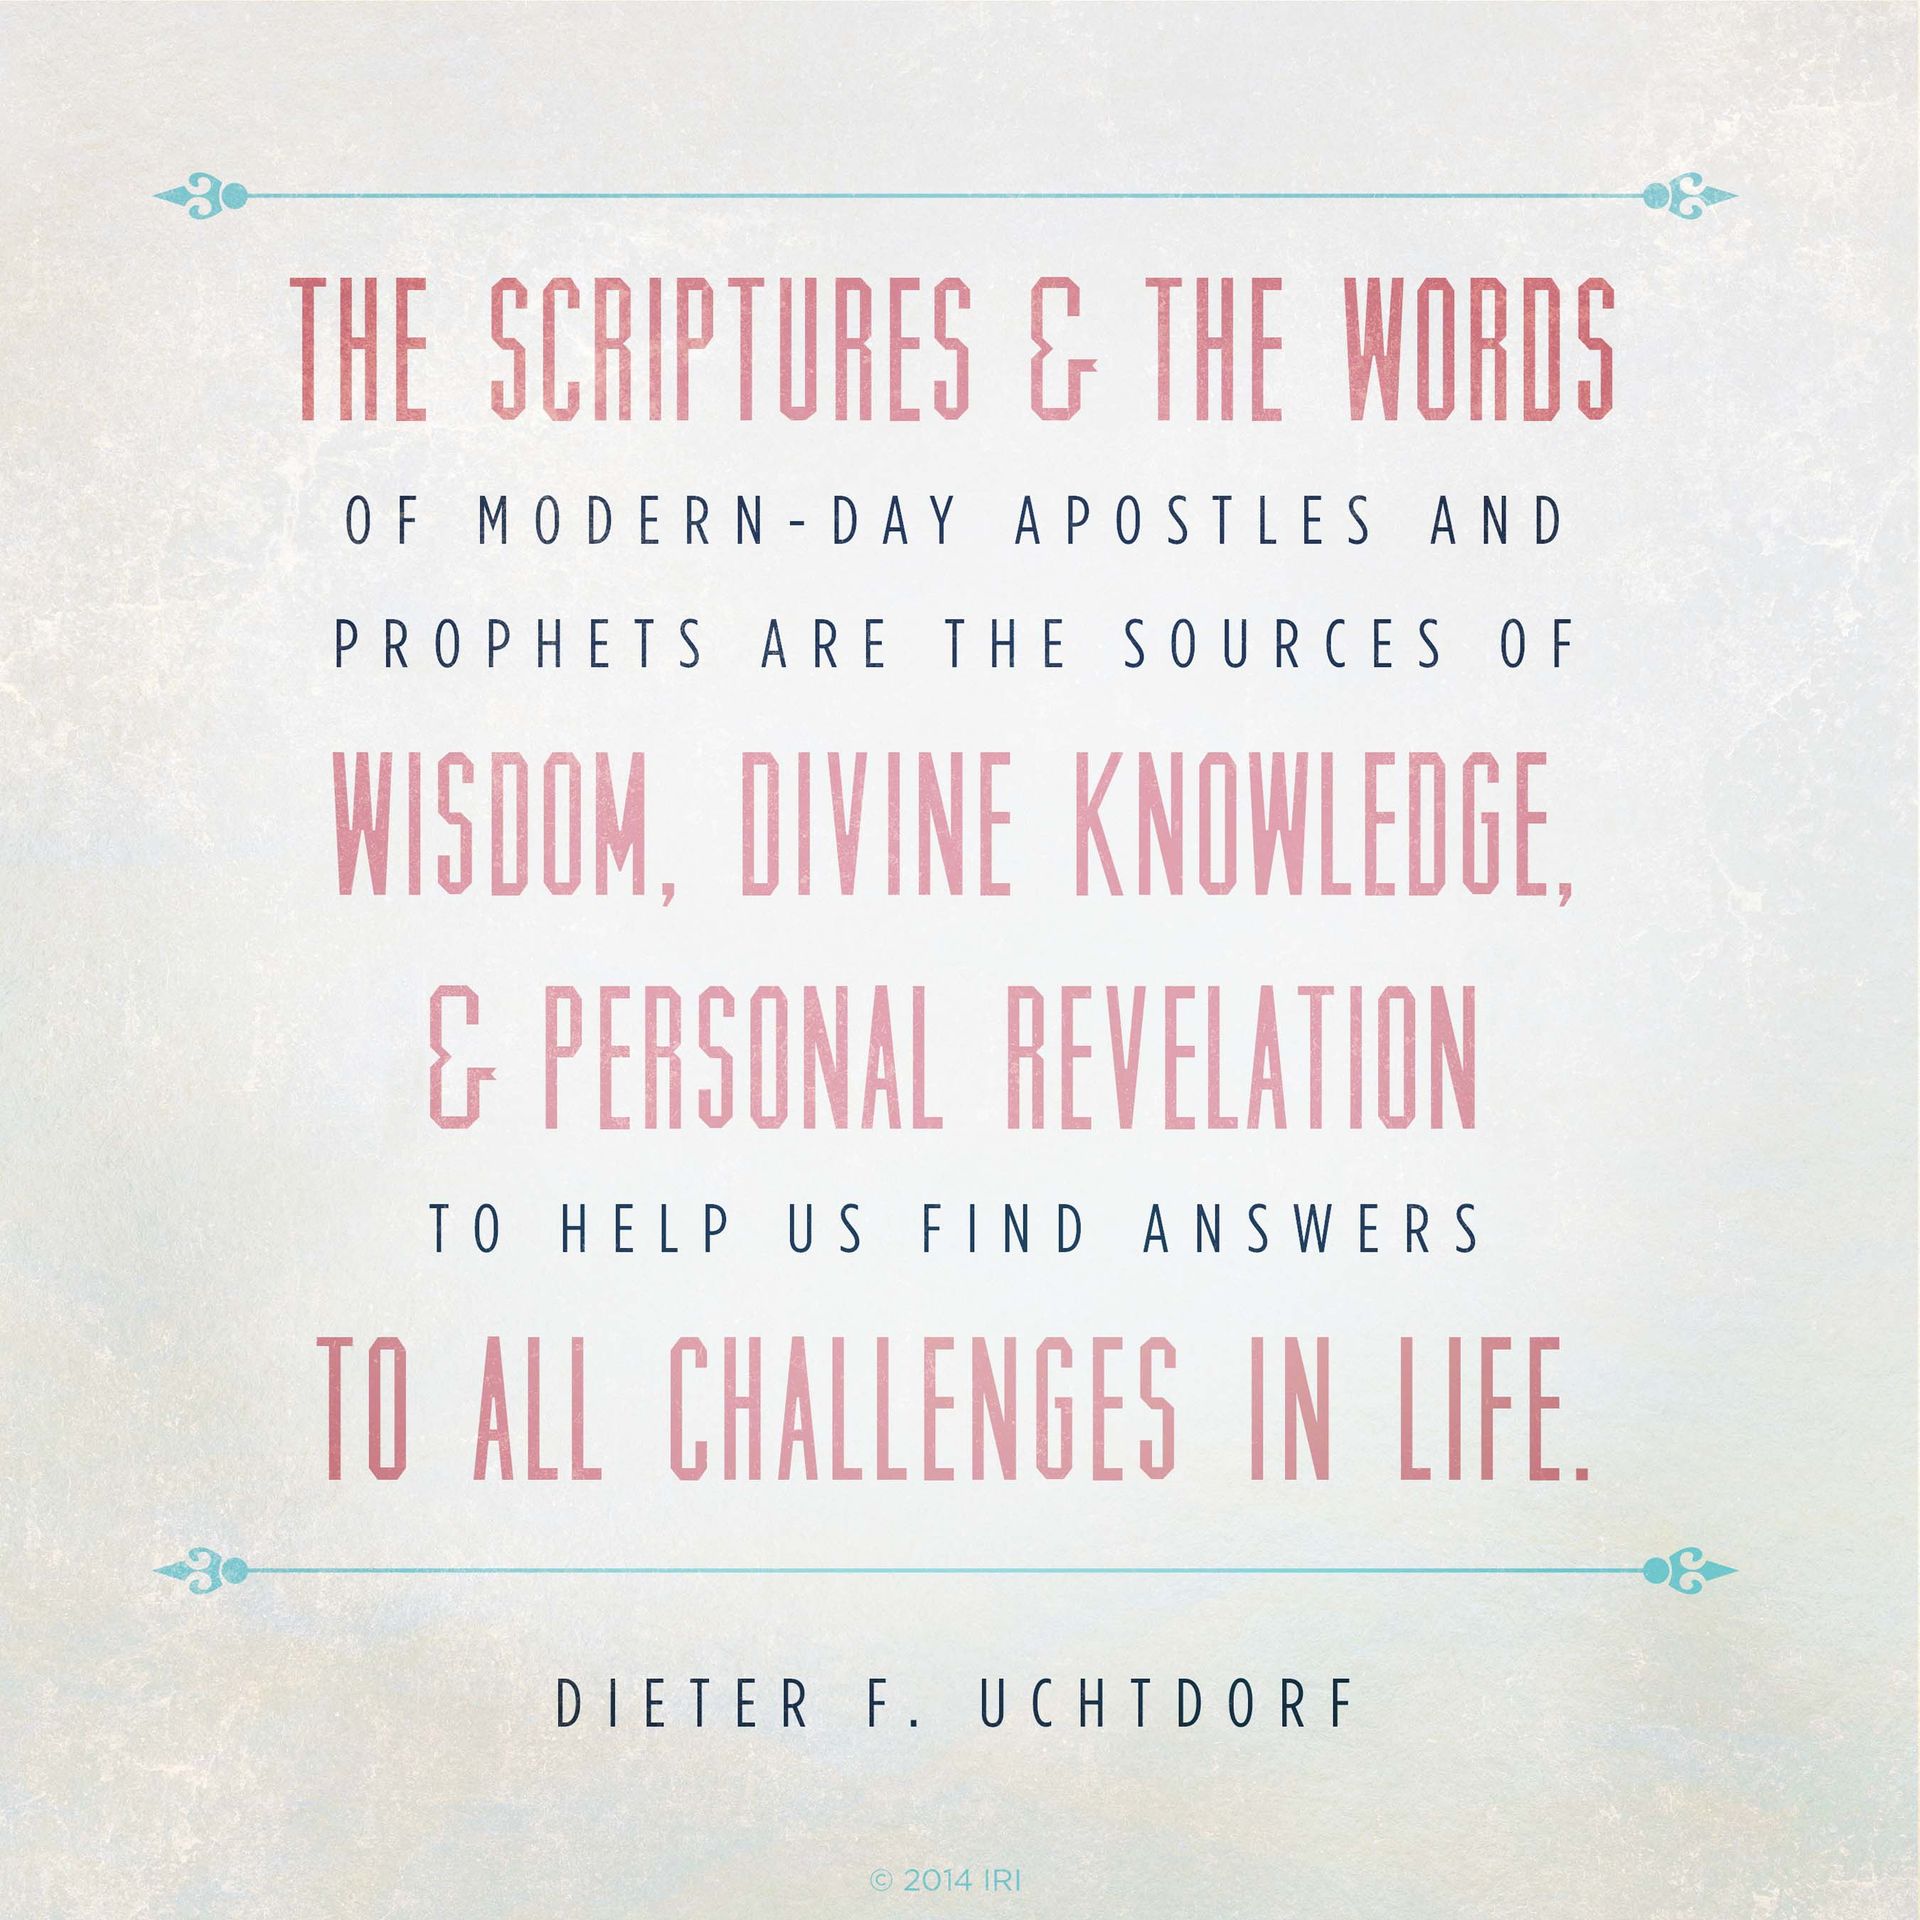 “The scriptures and the words of modern-day apostles and prophets are the sources of wisdom, divine knowledge, and personal revelation to help us find answers to all challenges in life.”—President Dieter F. Uchtdorf, “Two Principles for Any Economy”